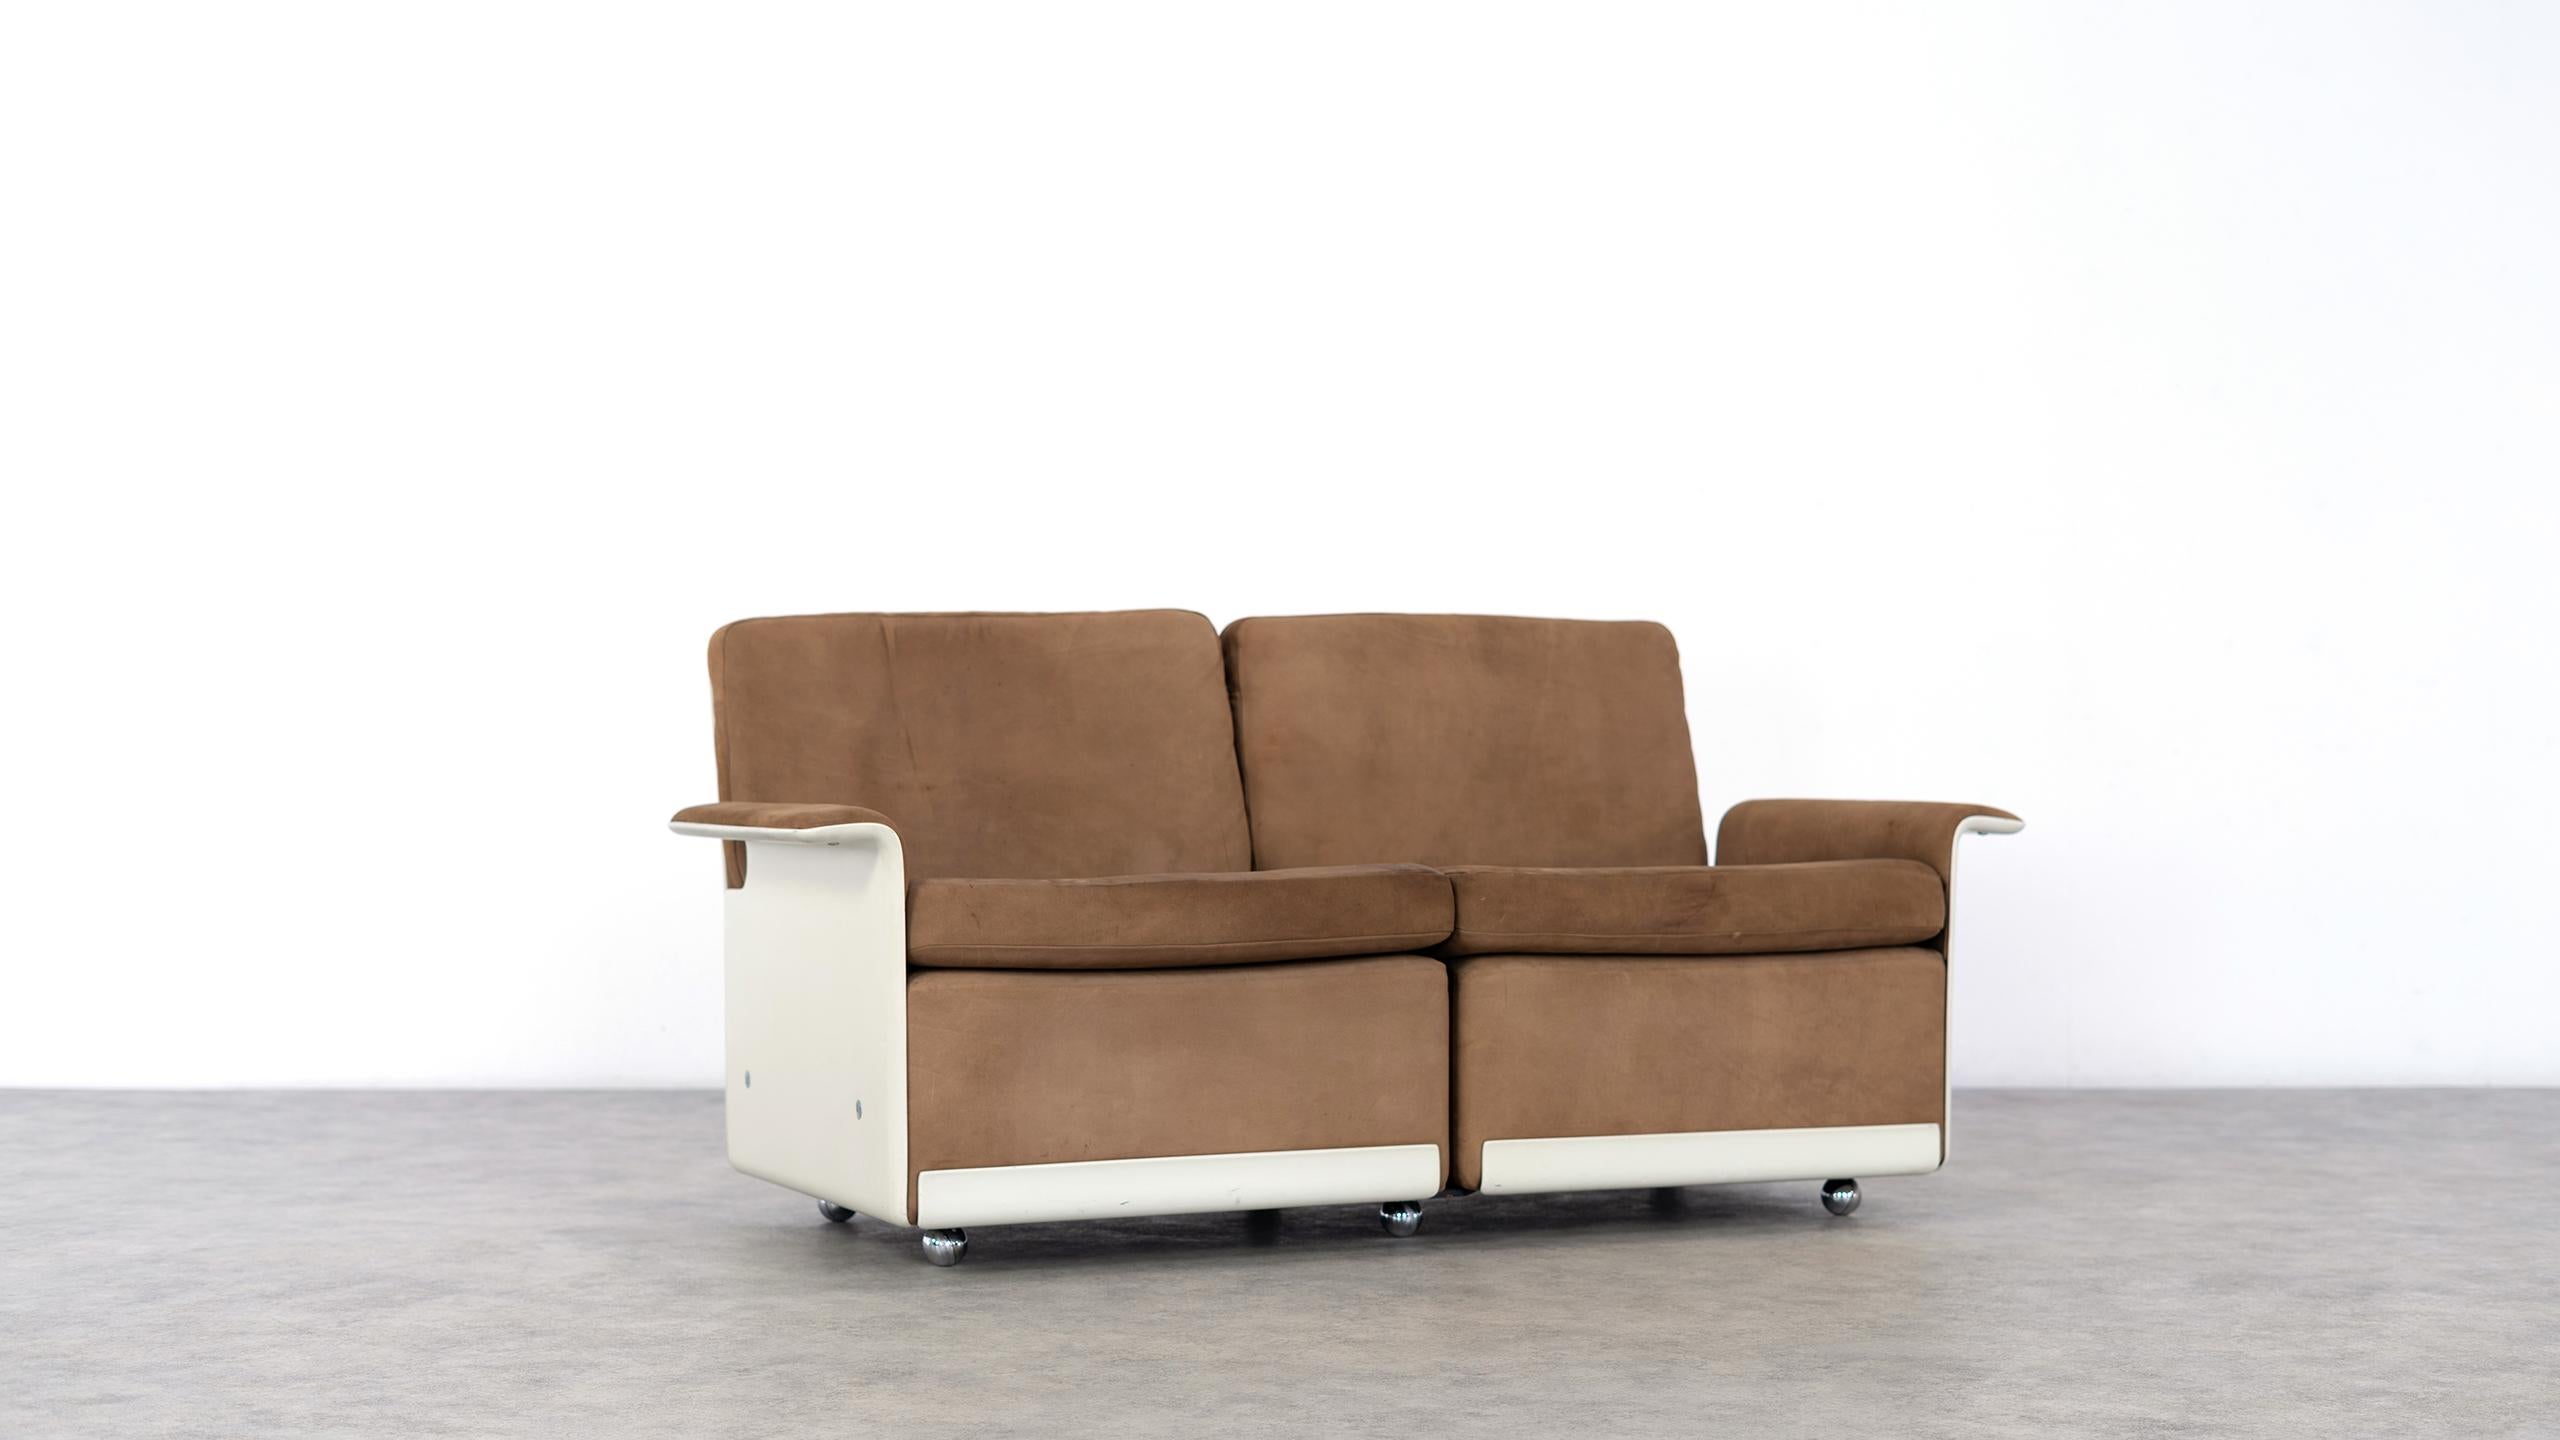 Two-seat sofa from the 620 chair programme in light brown nubuk.
Designed by Dieter Rams for Vitsœ in 1962.

The 620 chair programme is a kit of parts that adapts to your changing life. Separate chairs can become a sofa – or vice versa – at any